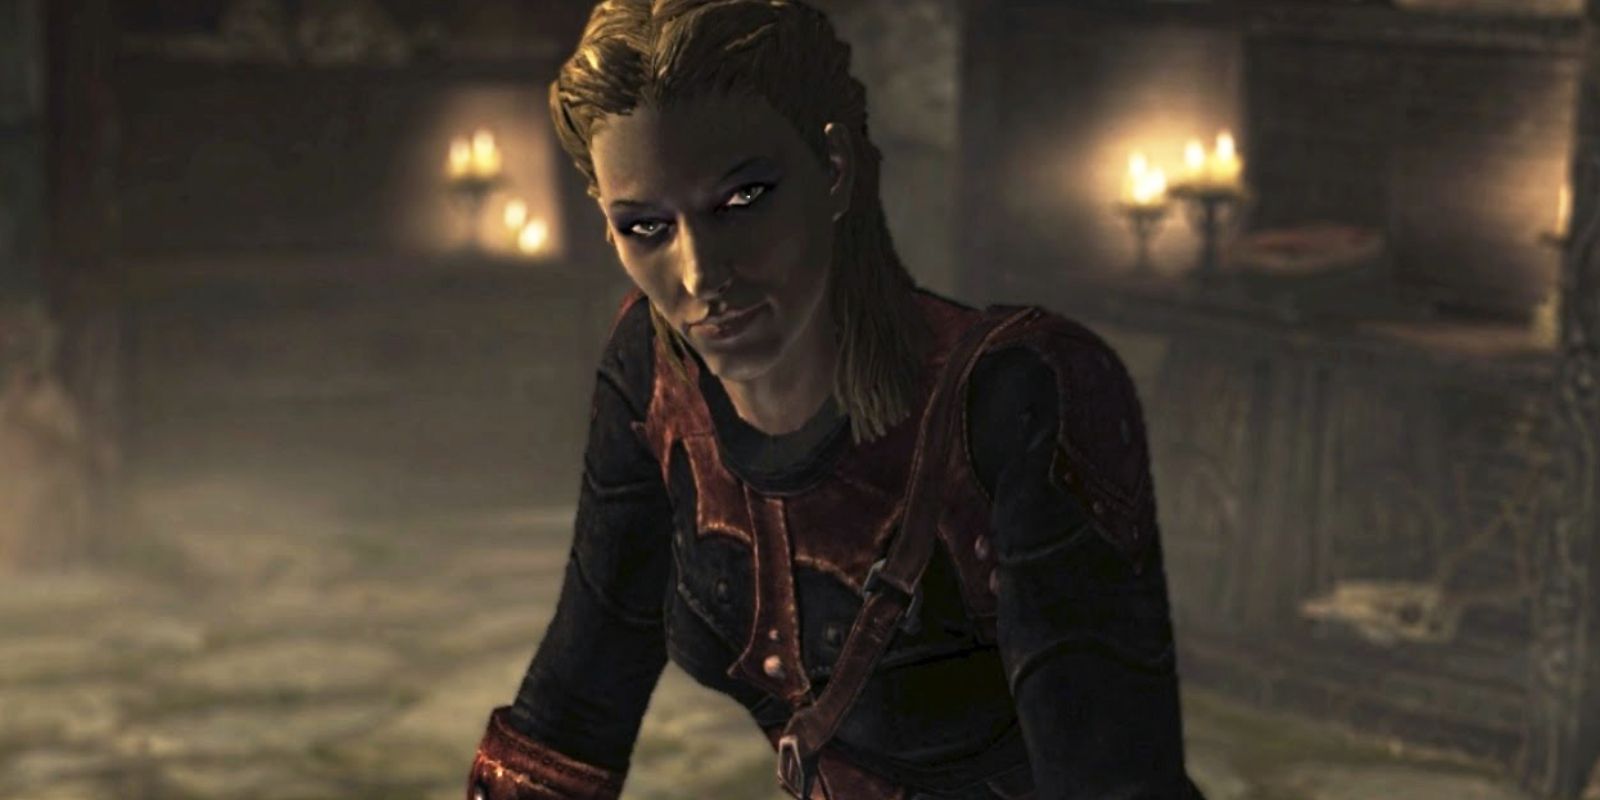 Skyrim Characters That Should Have Been Marriage Options But Werent Dark Brotherhood Thieves Guild Astrid Brynjolf